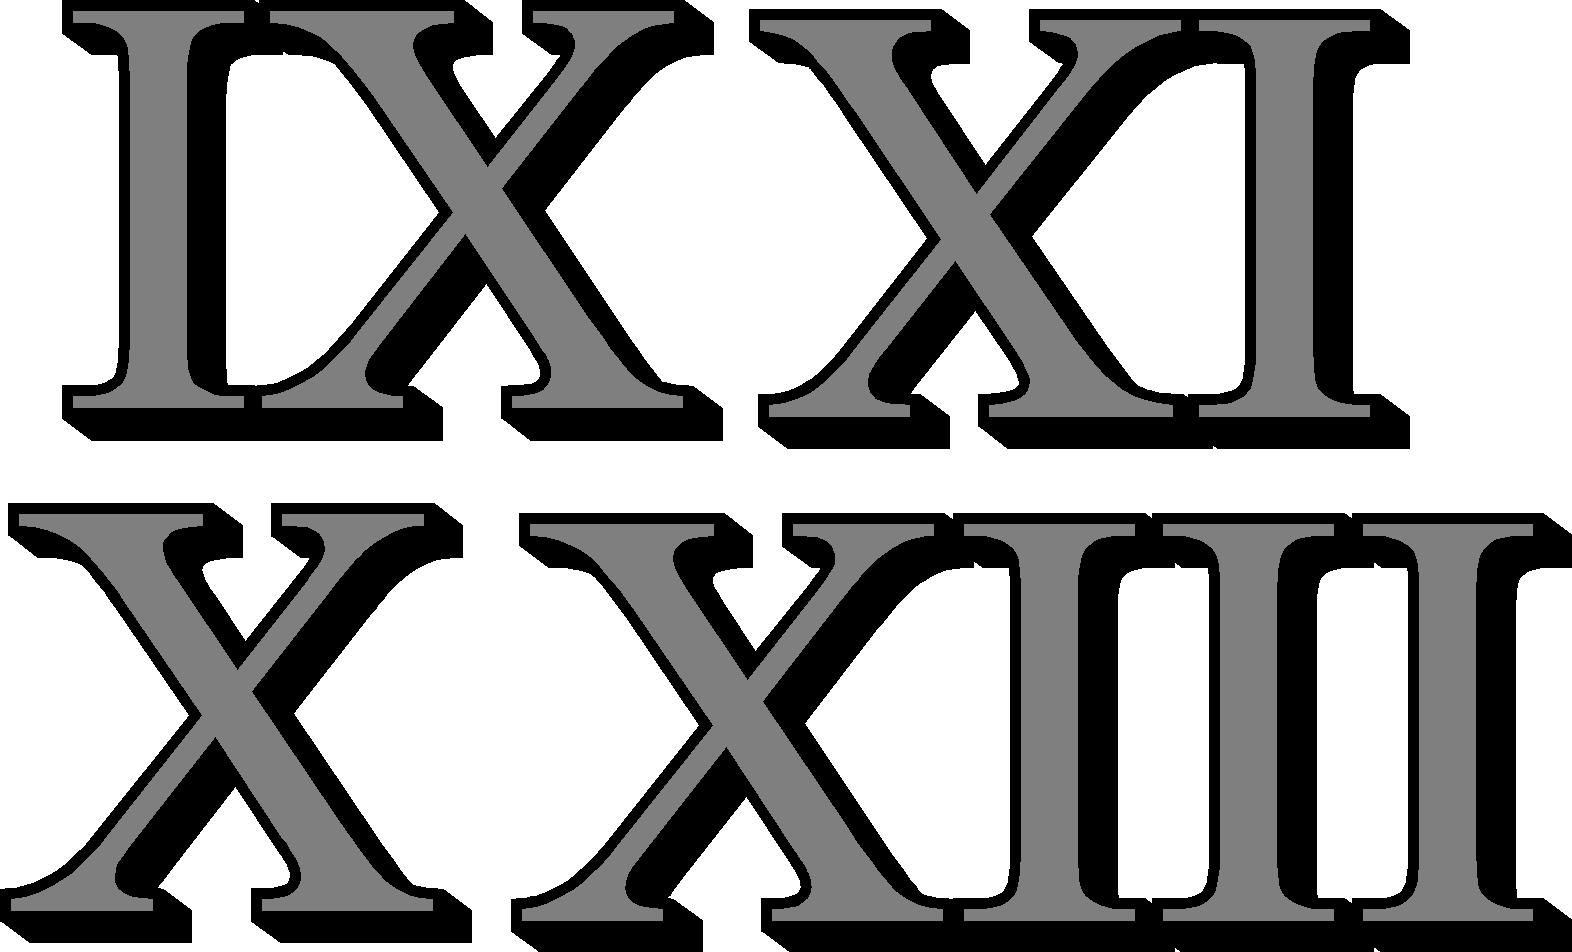 in a formal outline what should roman numerals represent